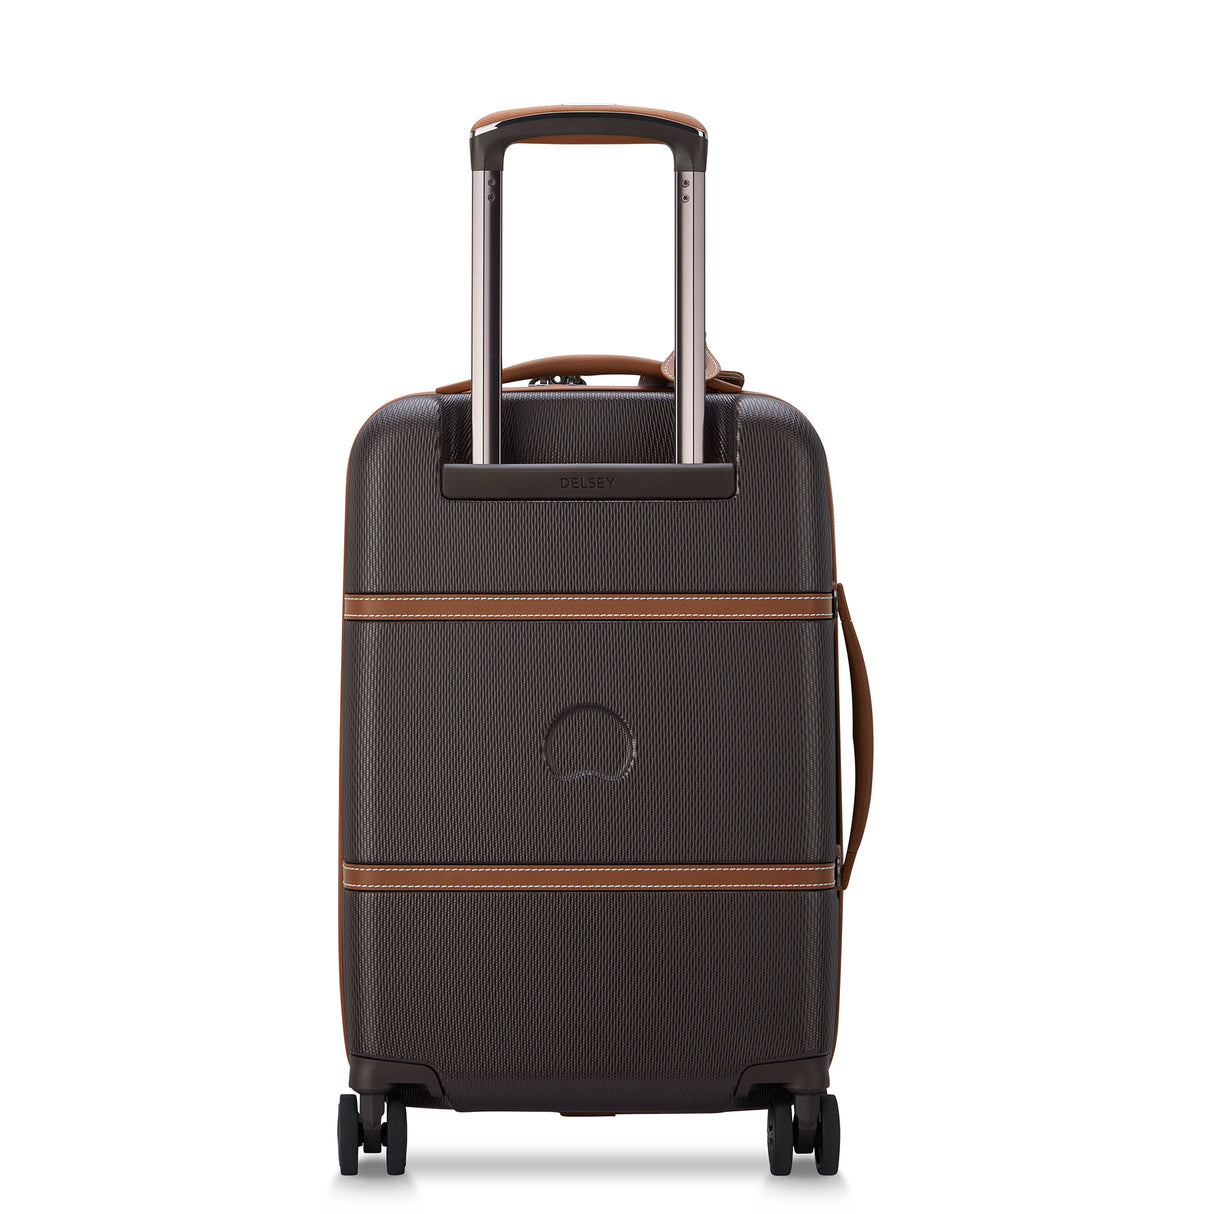 Delsey Chatelet Air 2.0 International Carry-On Spinner , , delsey-chatelet-air-2.0-40167680106-11